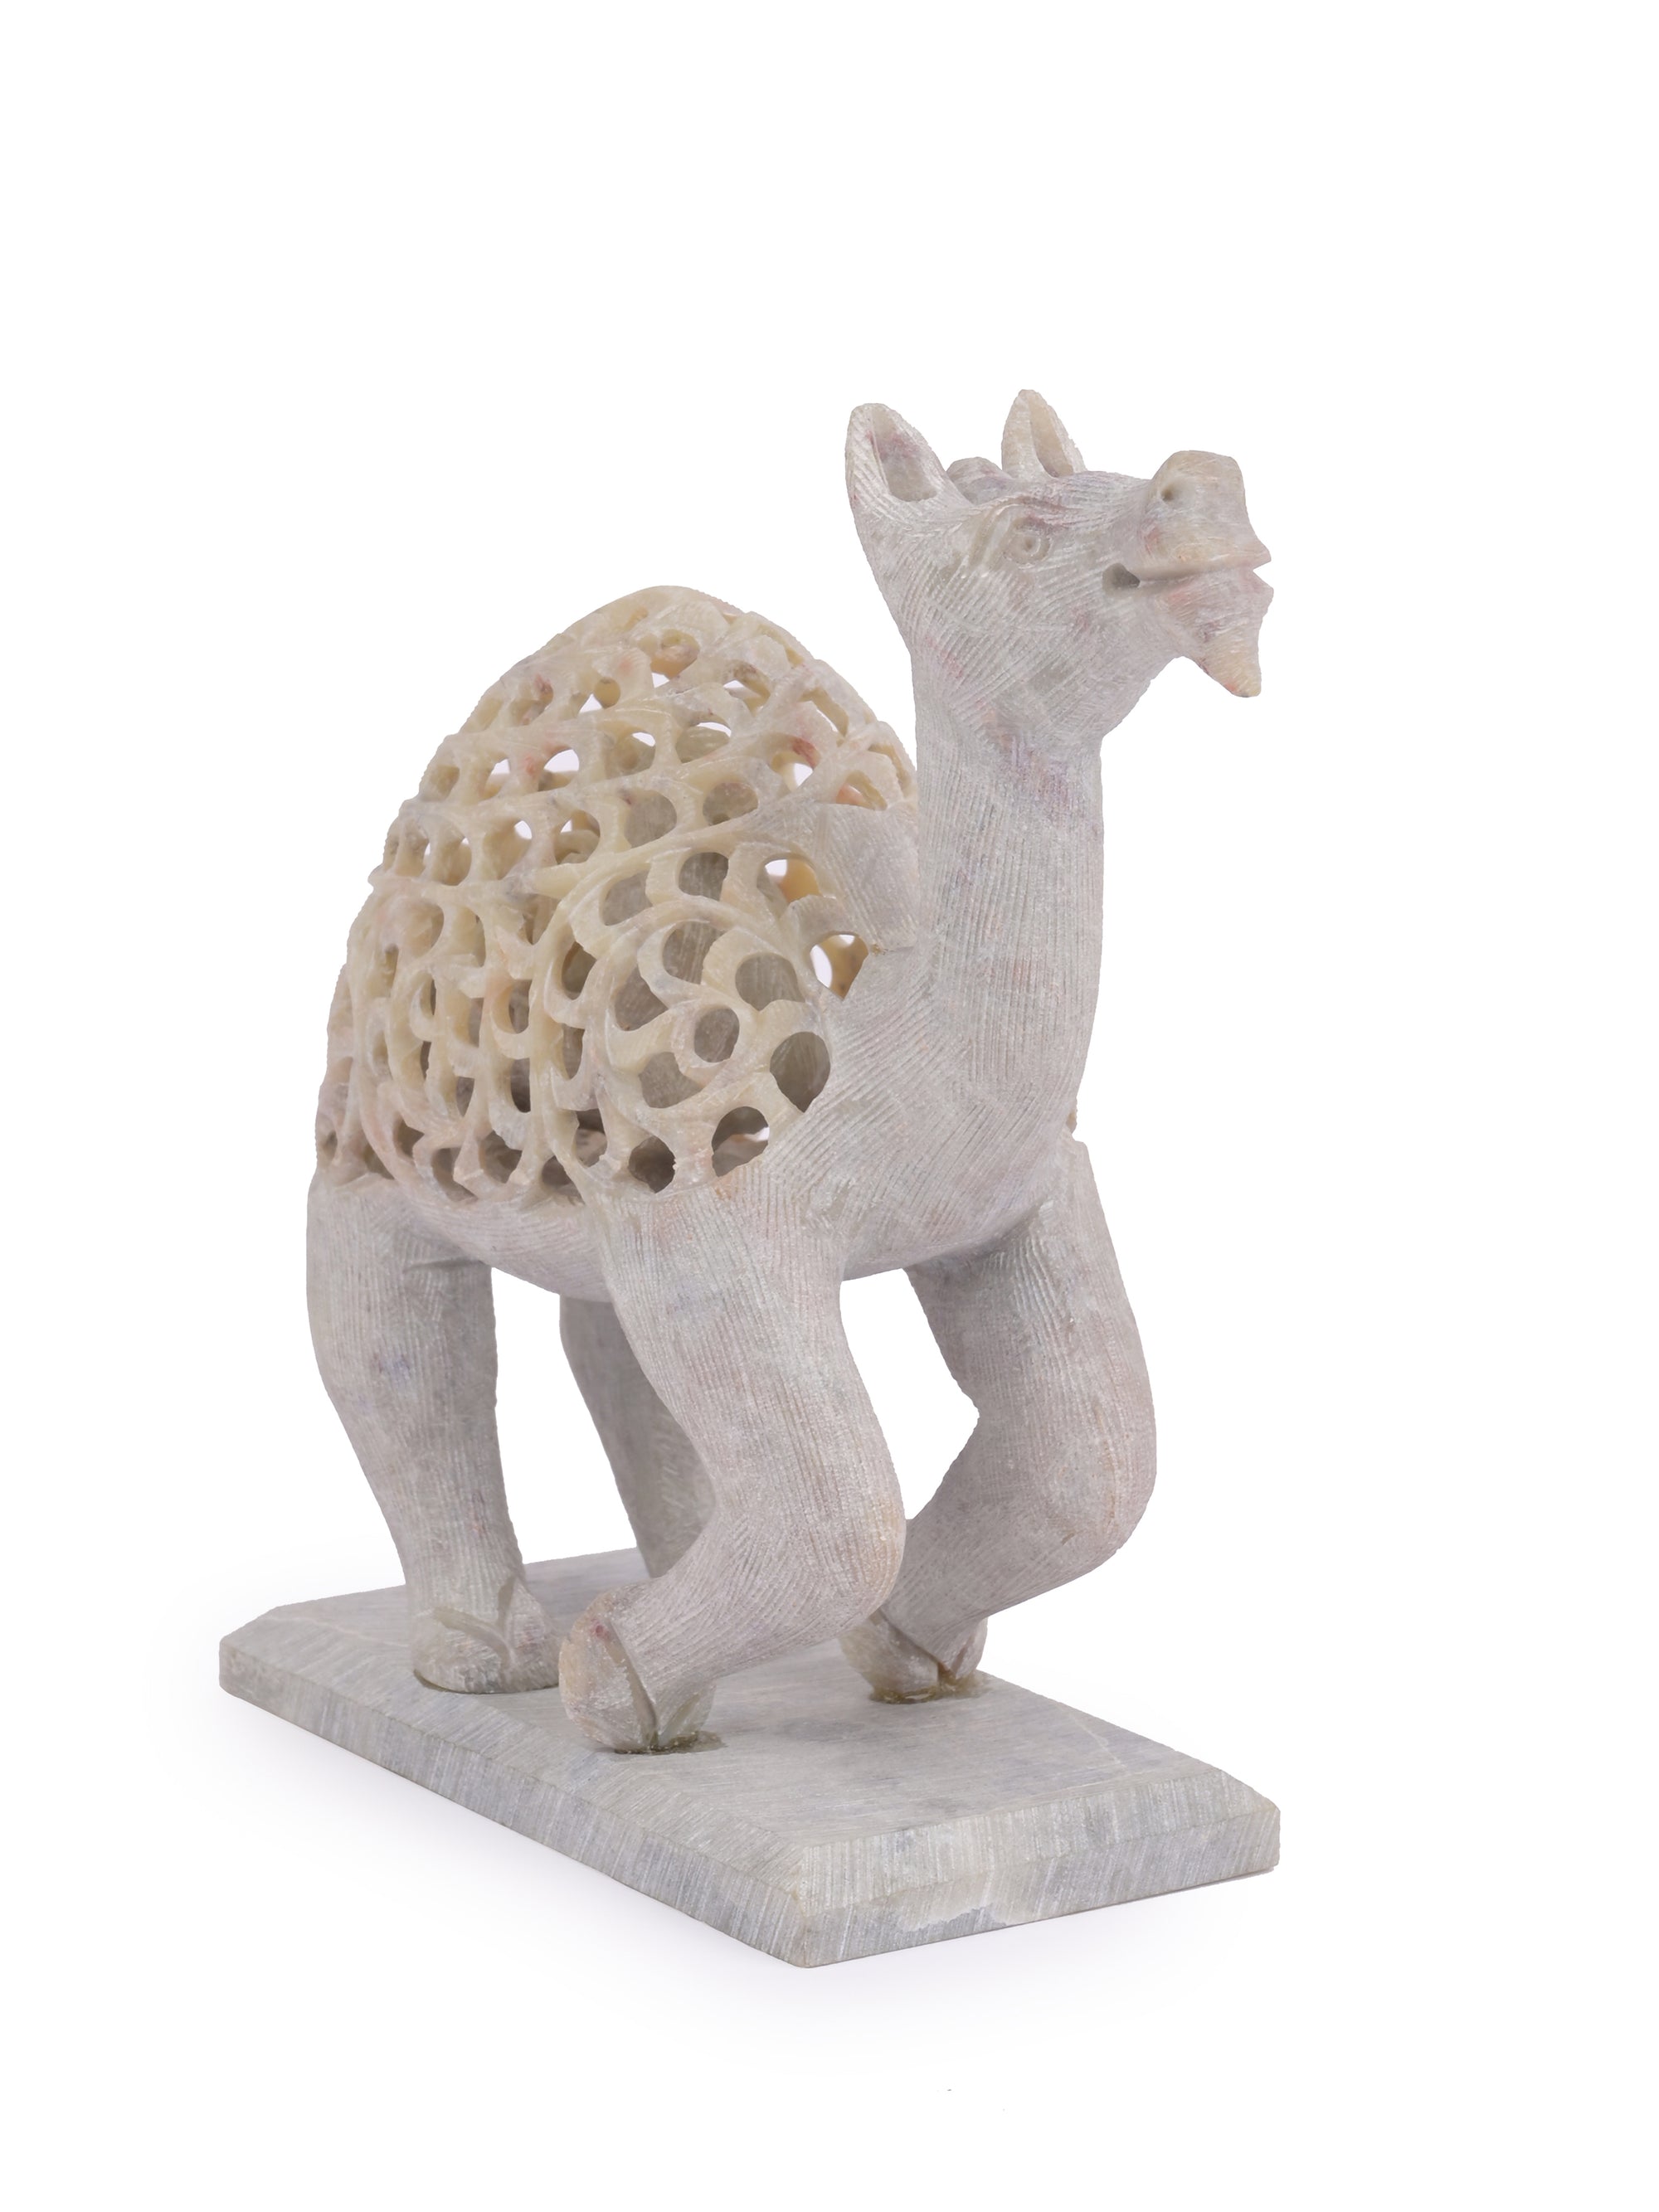 Camel Decorative showpiece with Jaali or open work hand carving on stone - The Heritage Artifacts